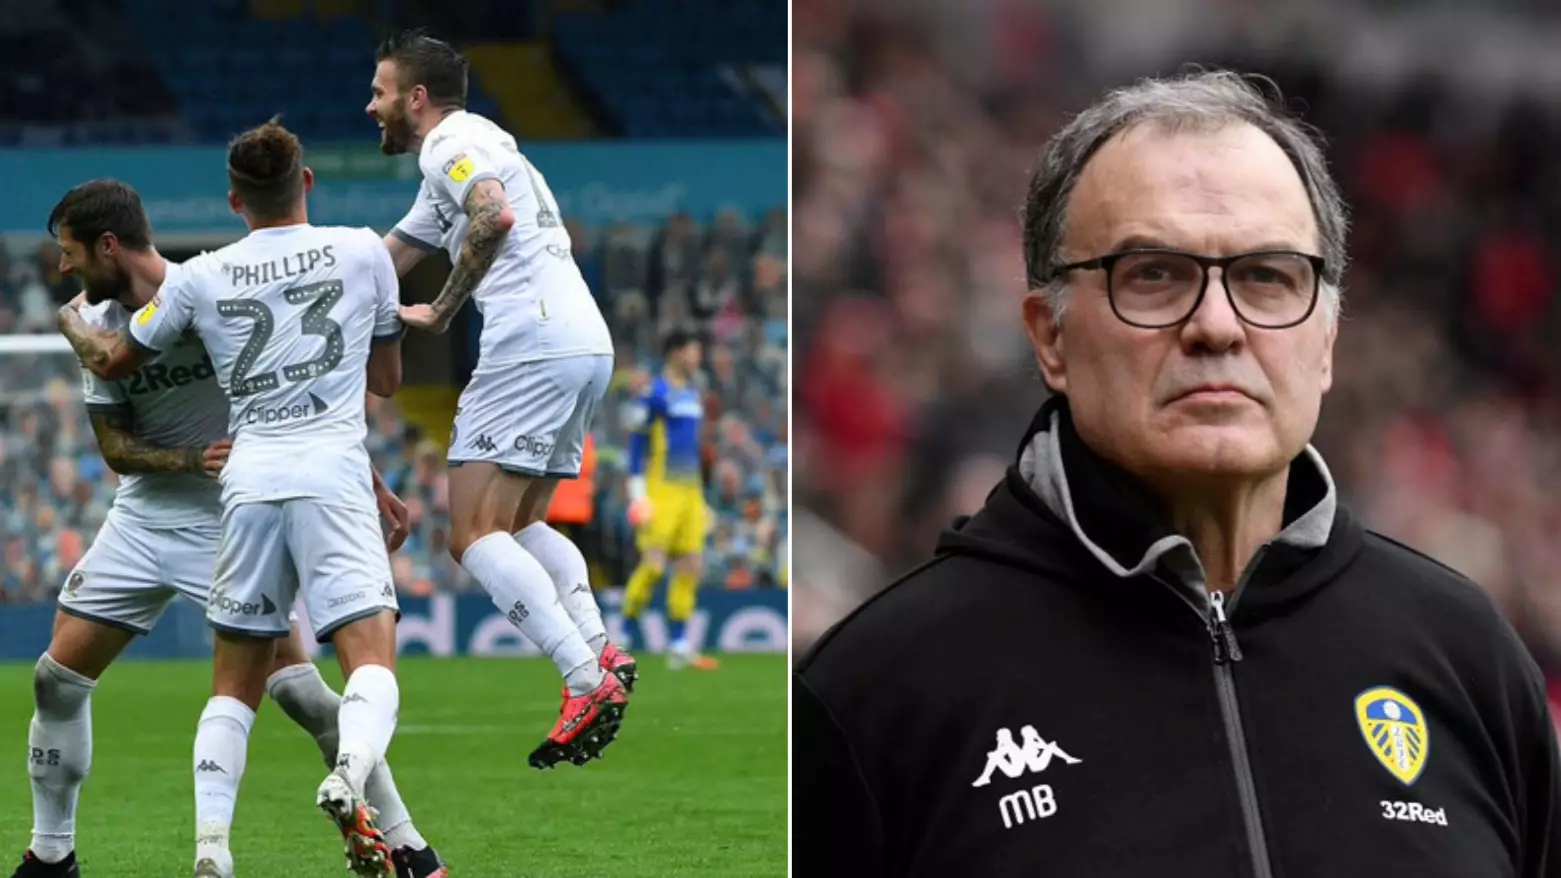 Leeds United Are Back In The Premier League After A 16 Year Wait